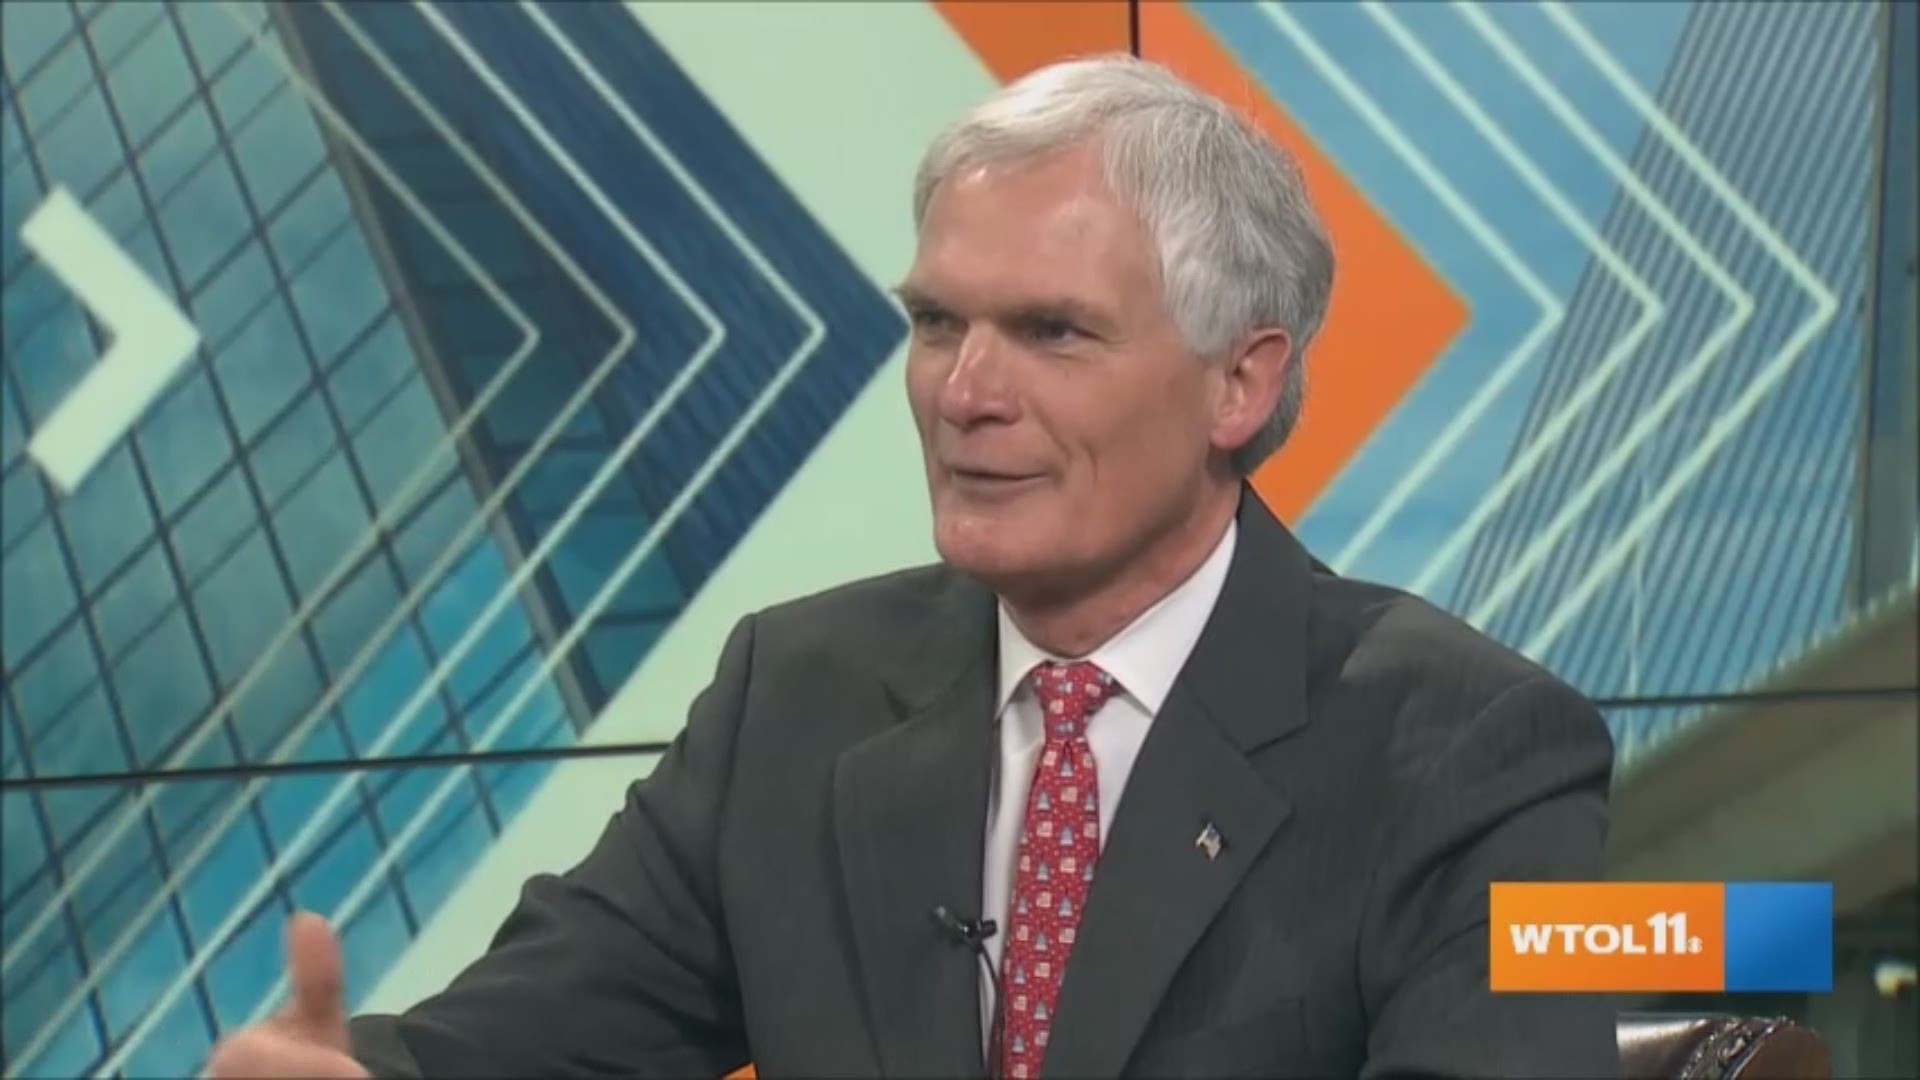 U.S. Rep. Bob Latta, R-OH, sits with Jerry Anderson and discusses the impeachment inquiry, Russia probe, healthcare, robocalls and internet connectivity.